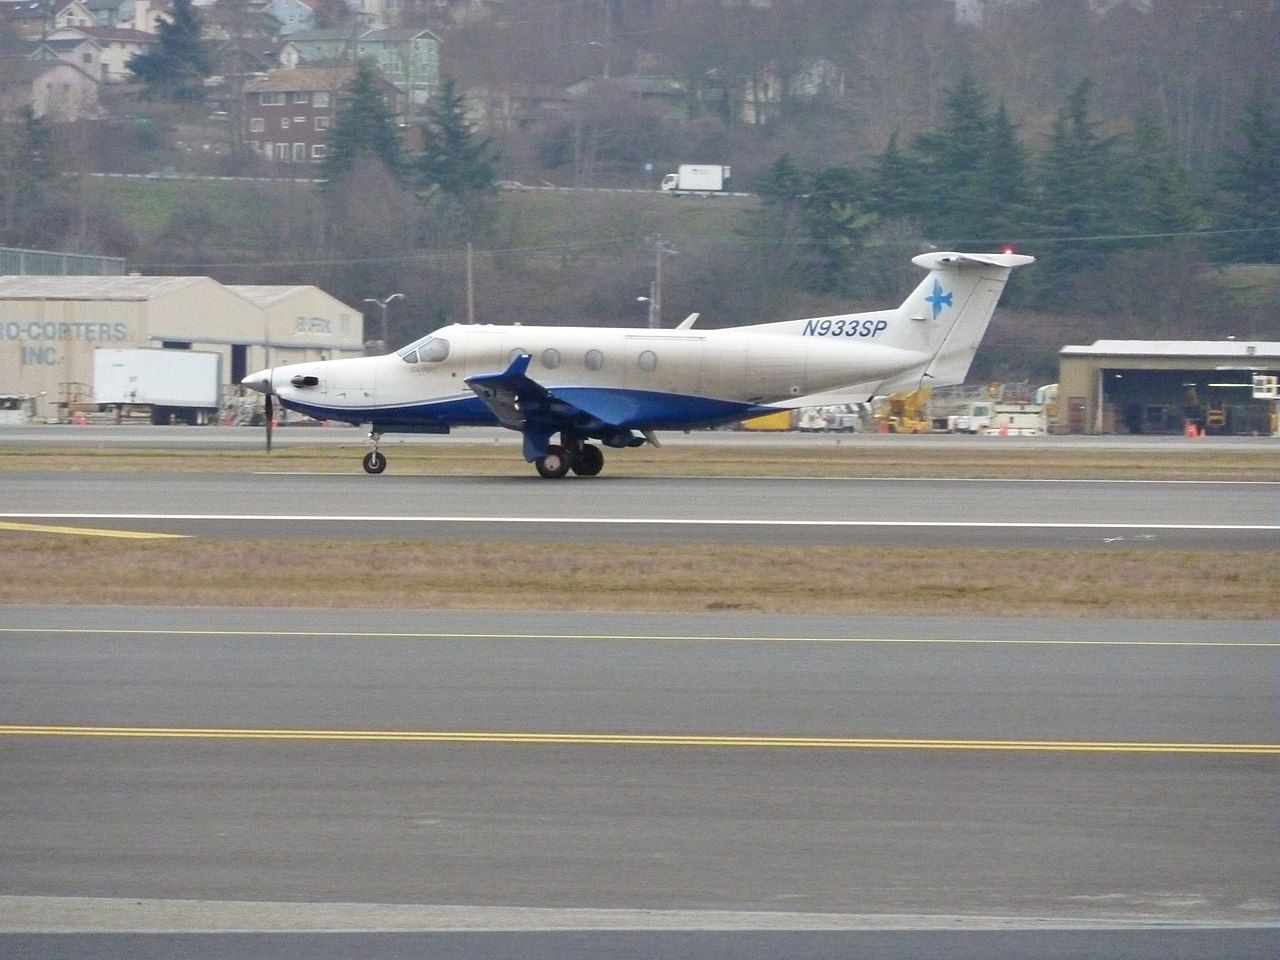 A Seaport Airlines Pilatus PC-12, registration N933SP, on the taxiway.